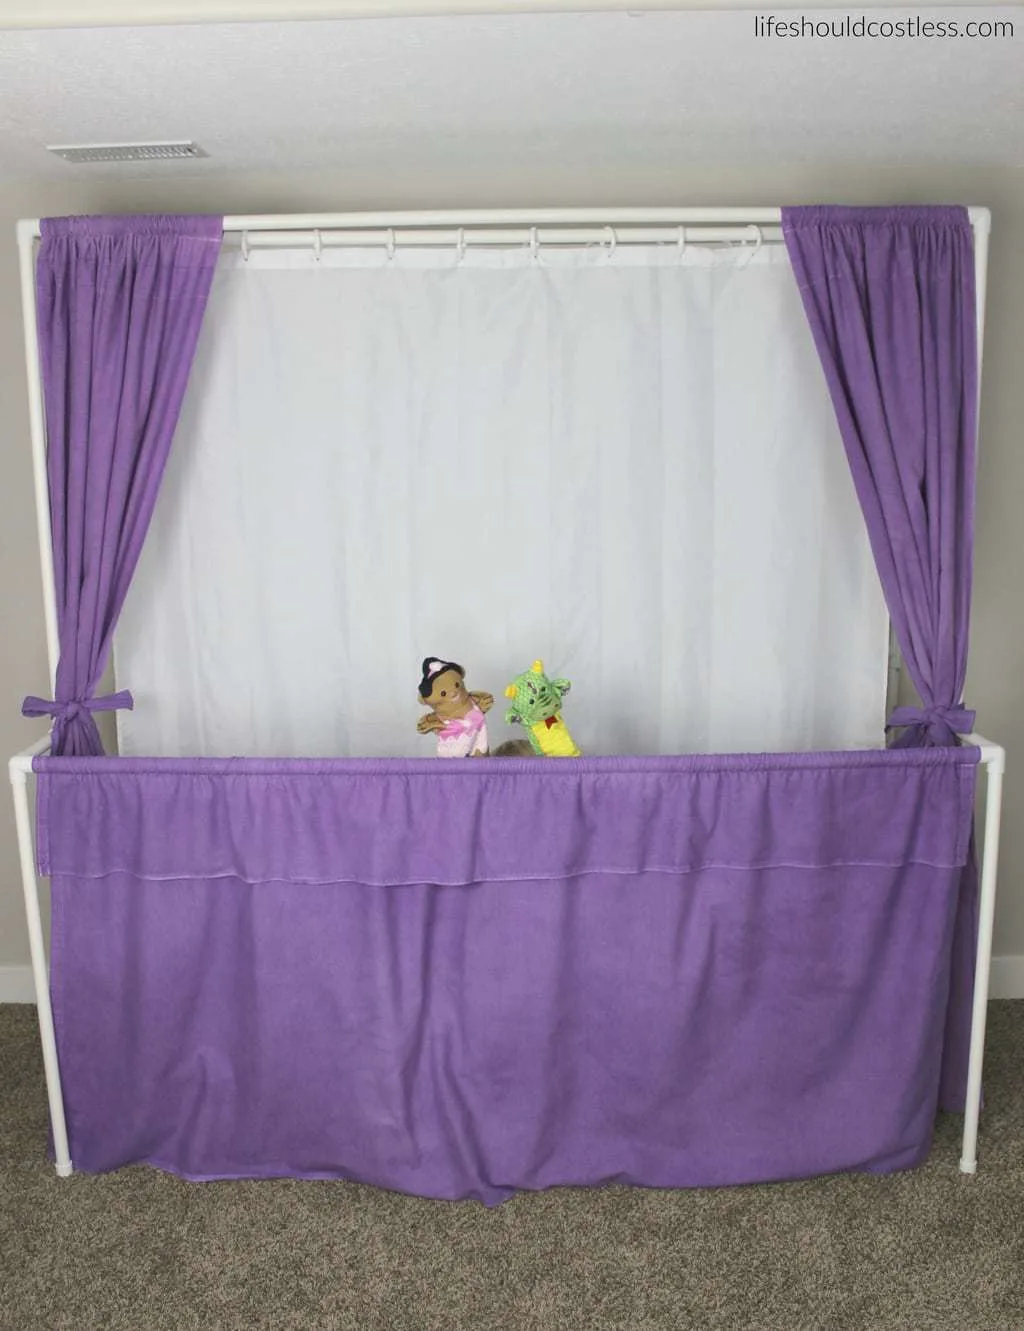 Multi-Use PVC Theater with washable and glow-in-the-dark backdrop options. The "thneed" of PVC theaters! It is so veratile that you can do almost anything. Best PVC project for kids. Puppet show option.